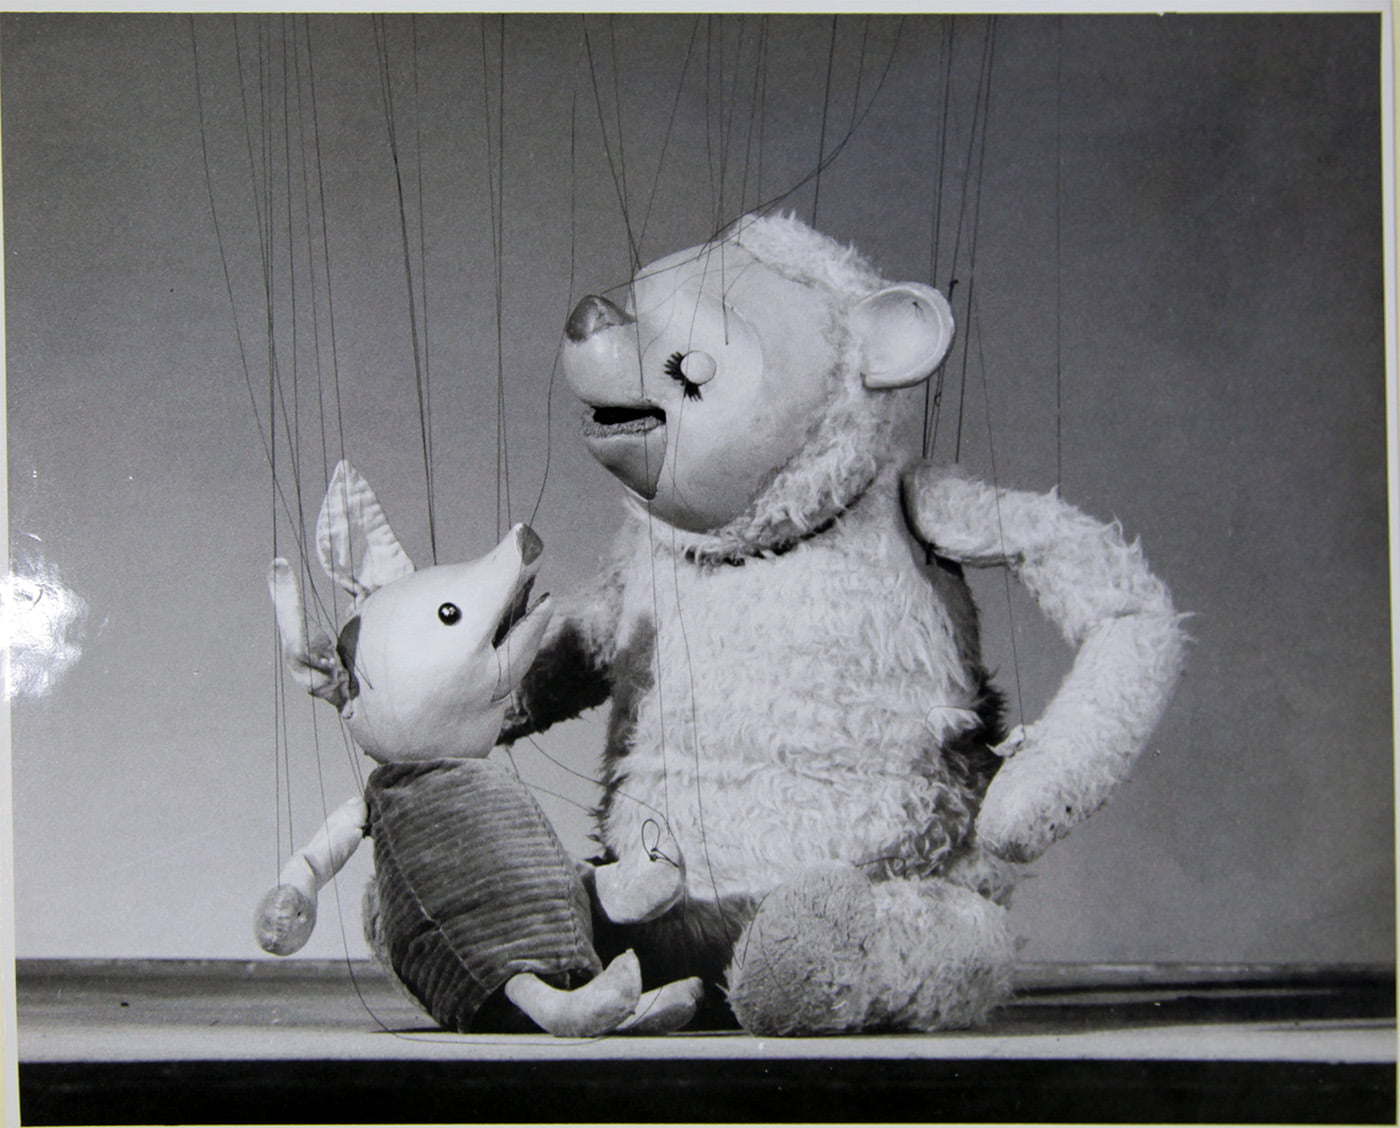 winnie the pooh and piglet black and white